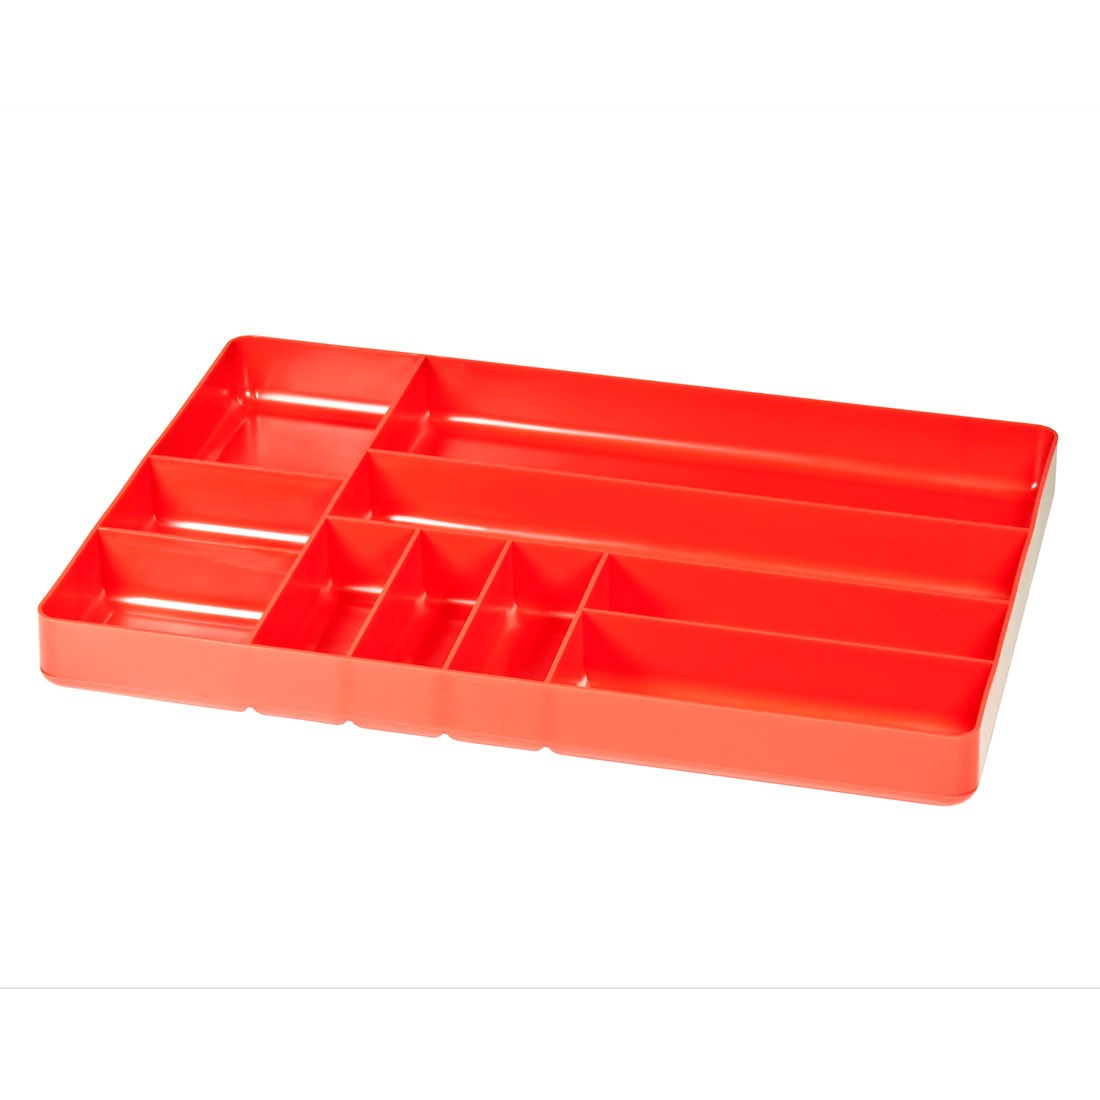 https://www.ernstmfg.com/resize/shared/images/product/5010_ten-compartment-organizer-tray_red-1100_1.jpg?bw=1000&w=1000&bh=1000&h=1000